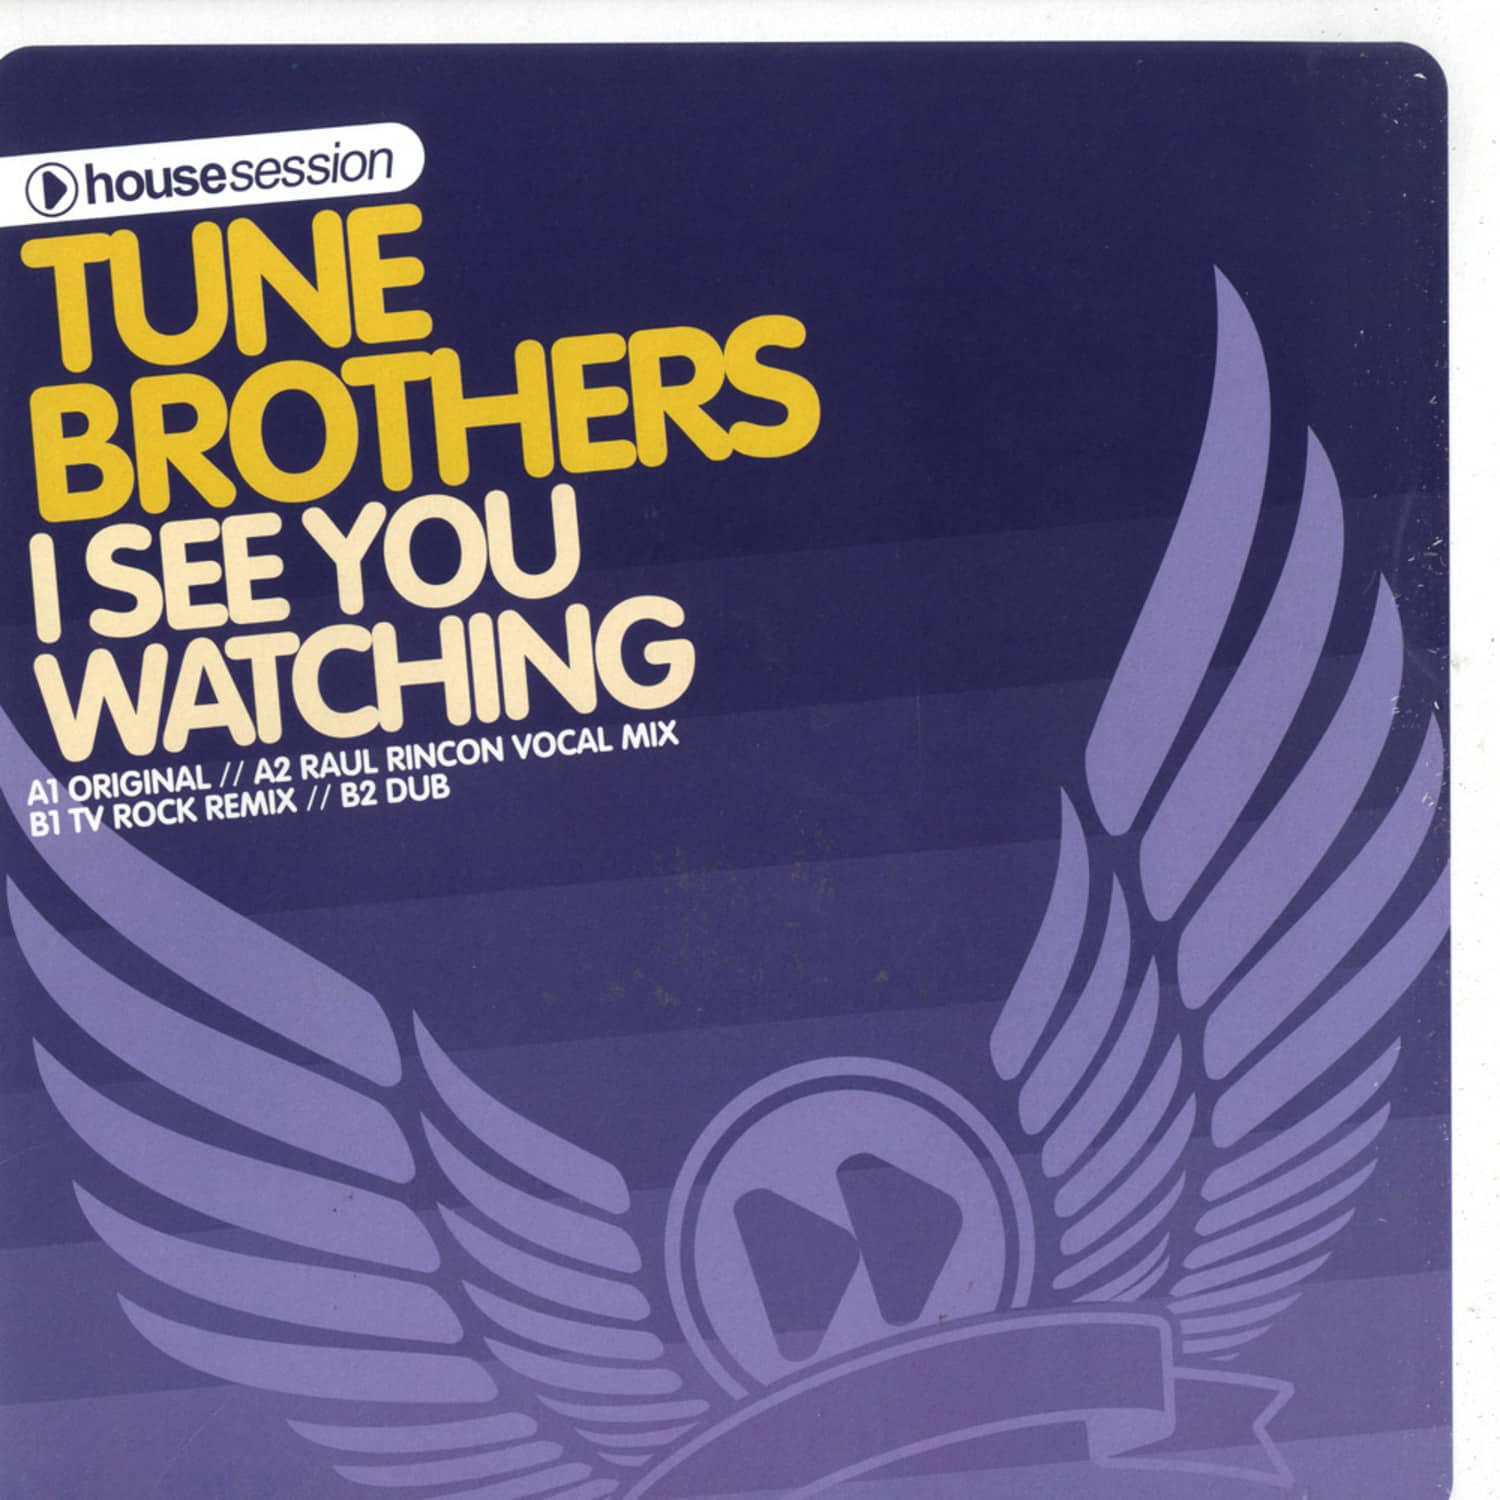 Tune Brothers - I SEE YOU WATCHING